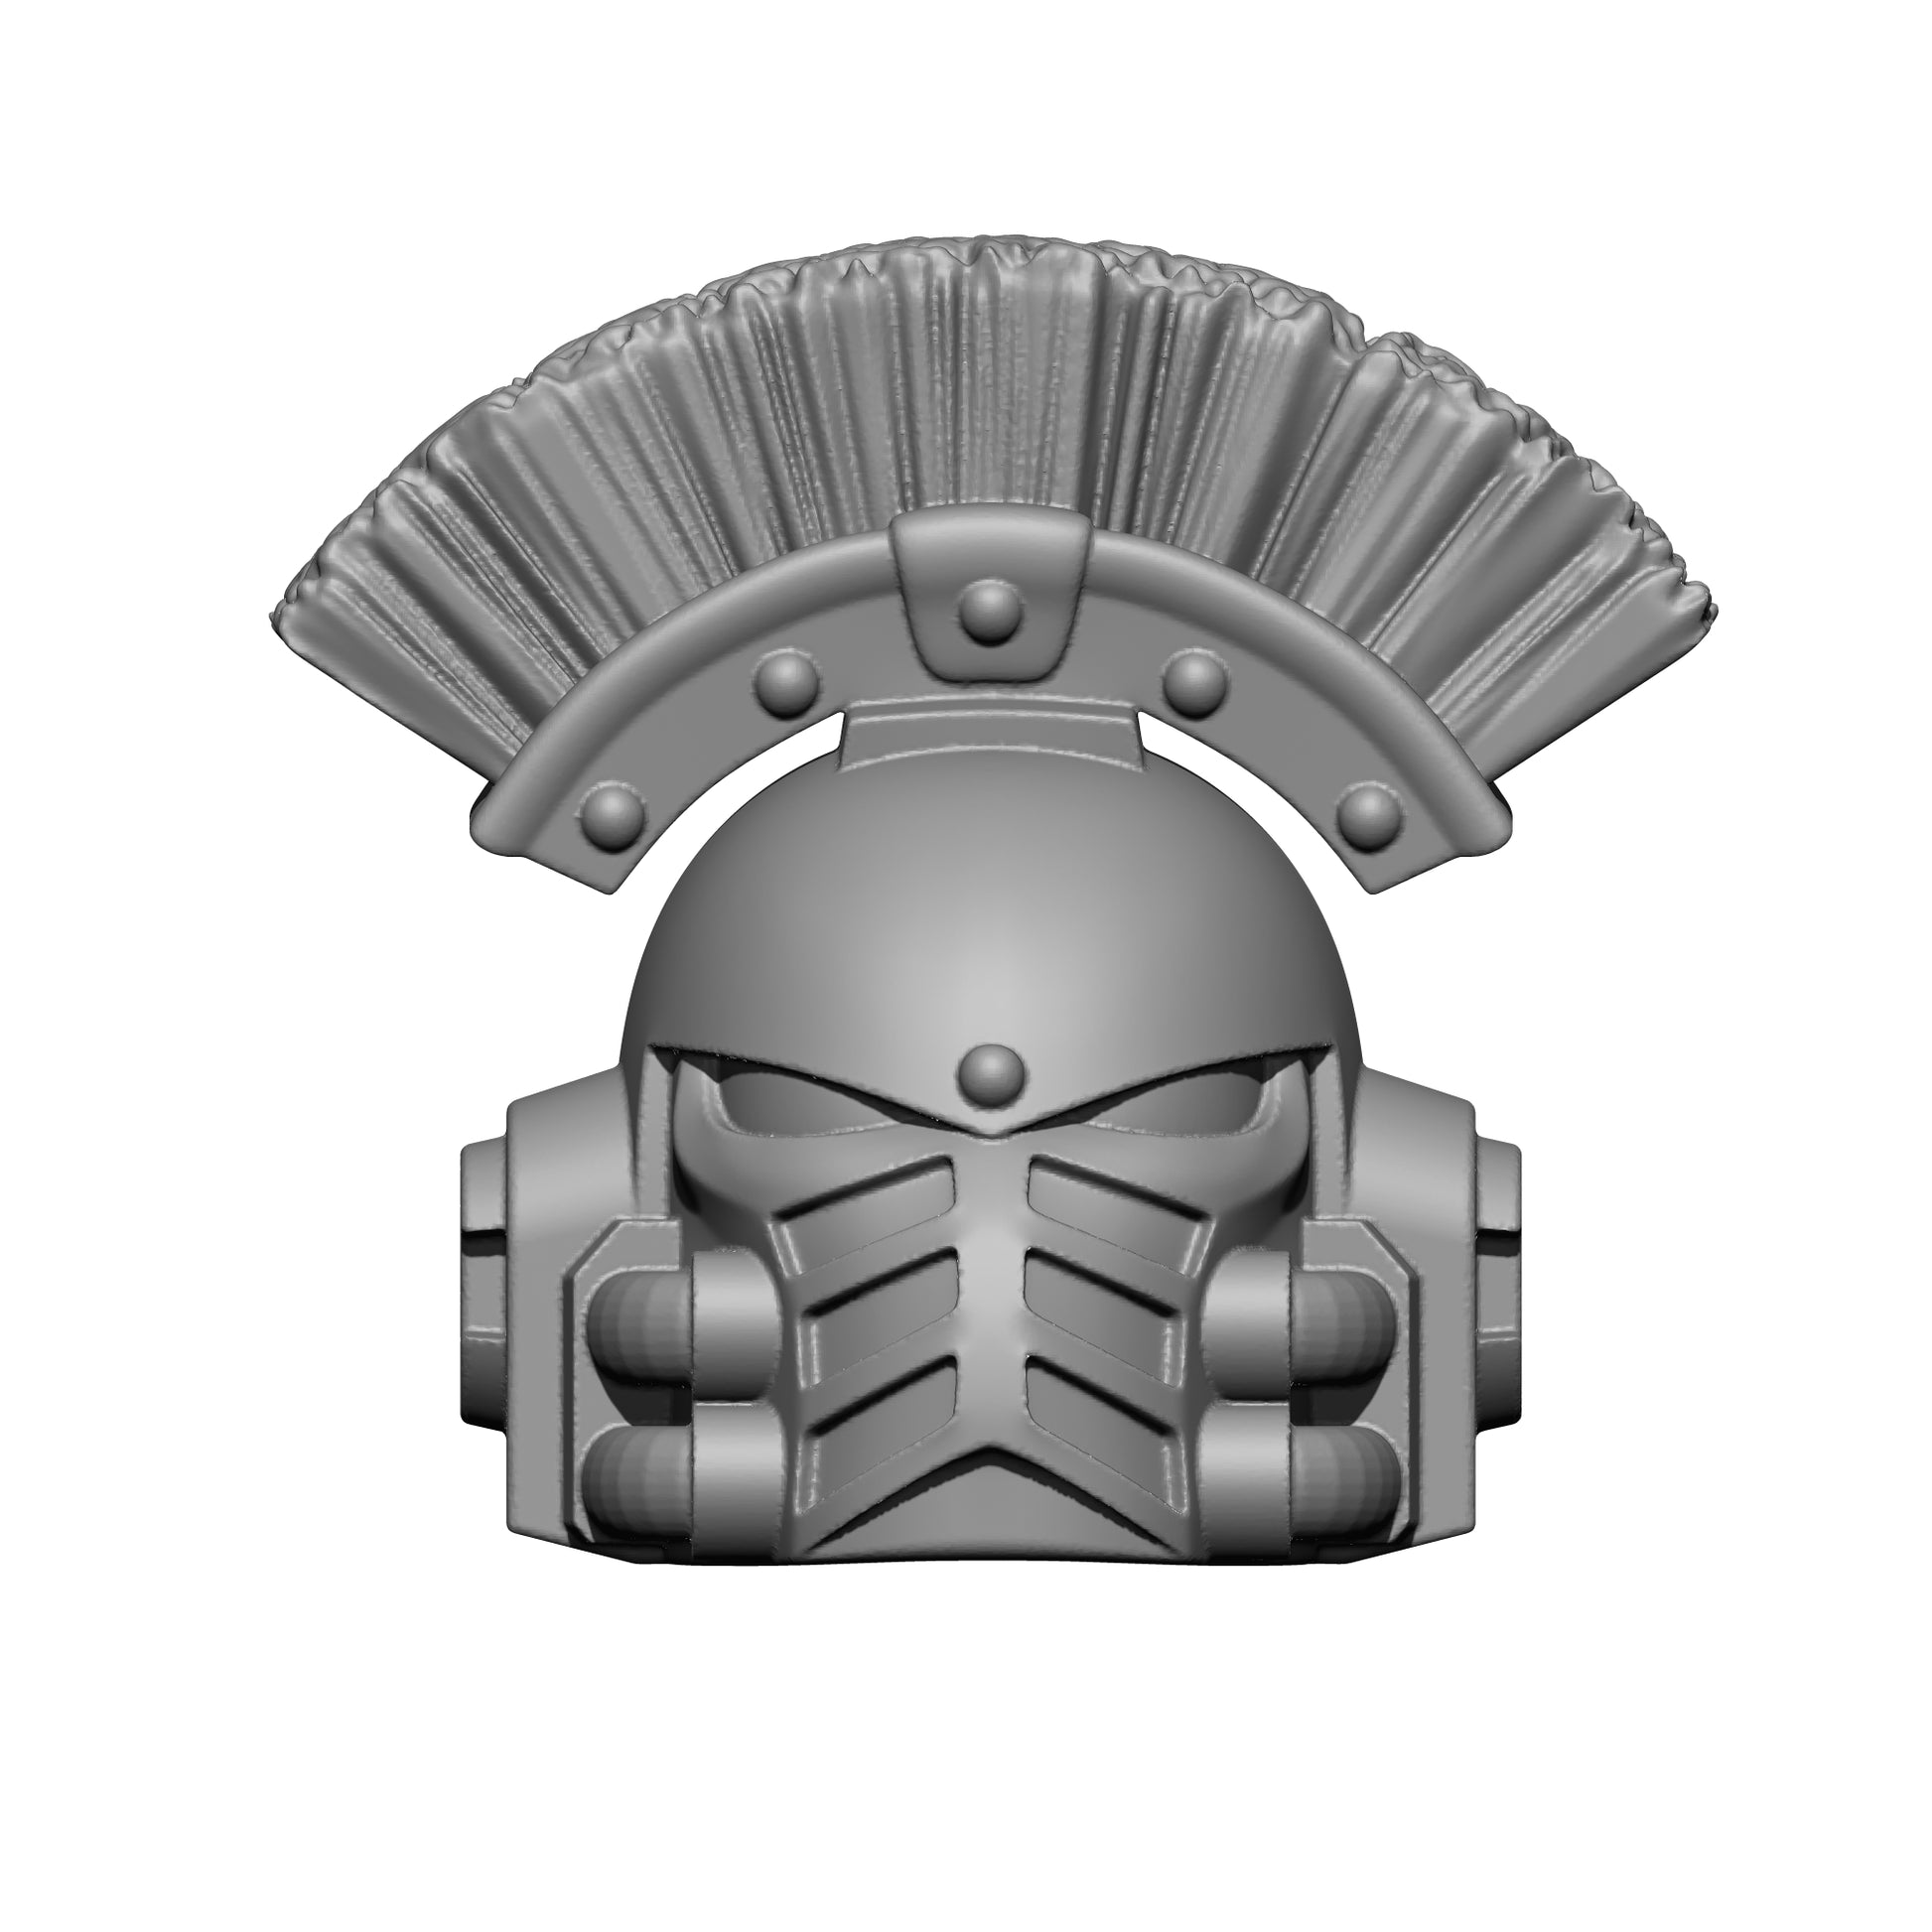 MK IV (Imperial Maximus) Helmet with Crest compatible with McFarlane Toys Space Marines designed by Fantasy World Games